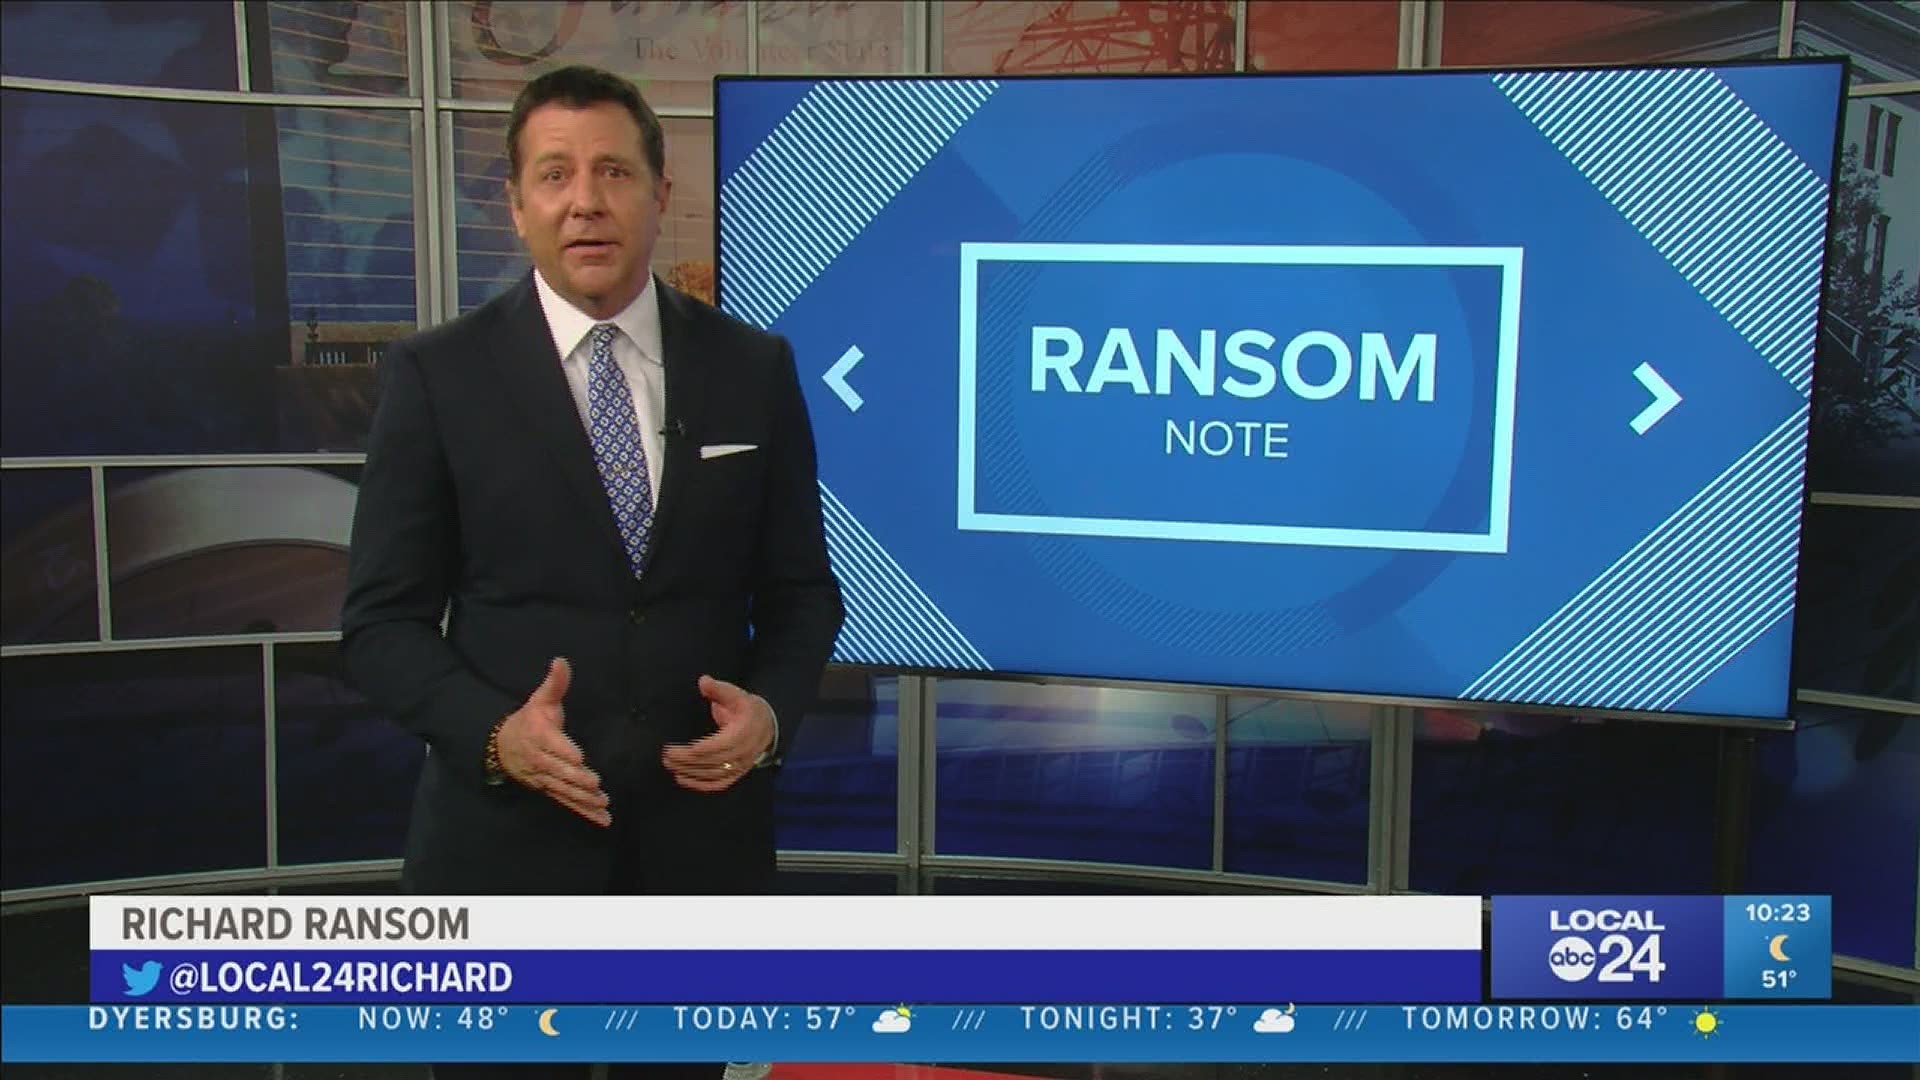 Local 24 News Anchor Richard Ransom discusses in his Ransom Note about a study done that shows the good and bad of remote working.